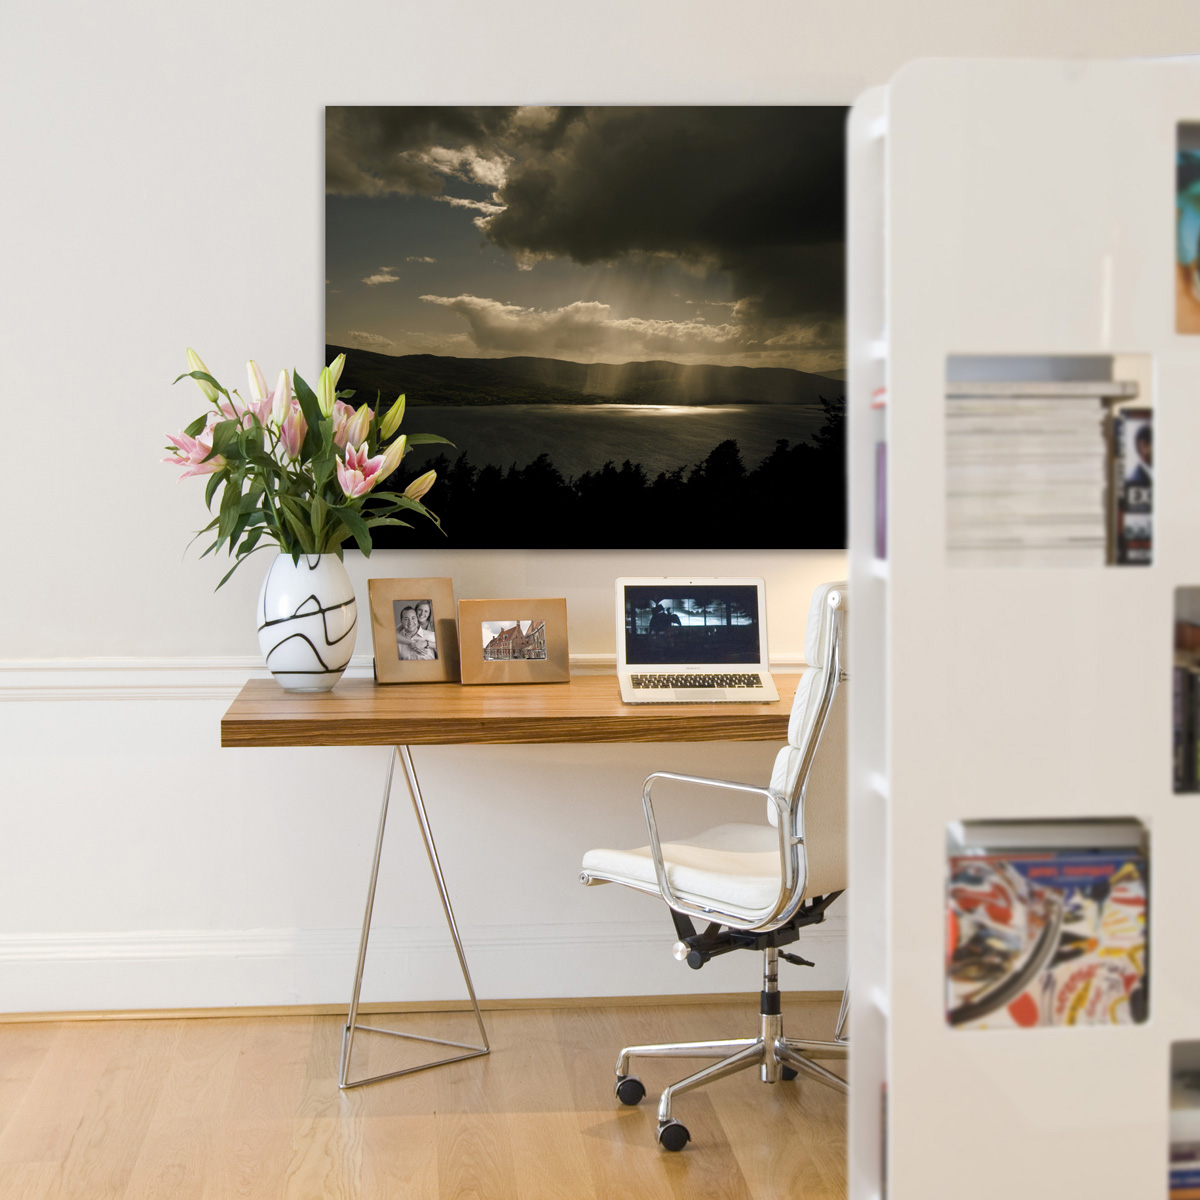 Landscape photograph in office environment showing Carlingford Lough.